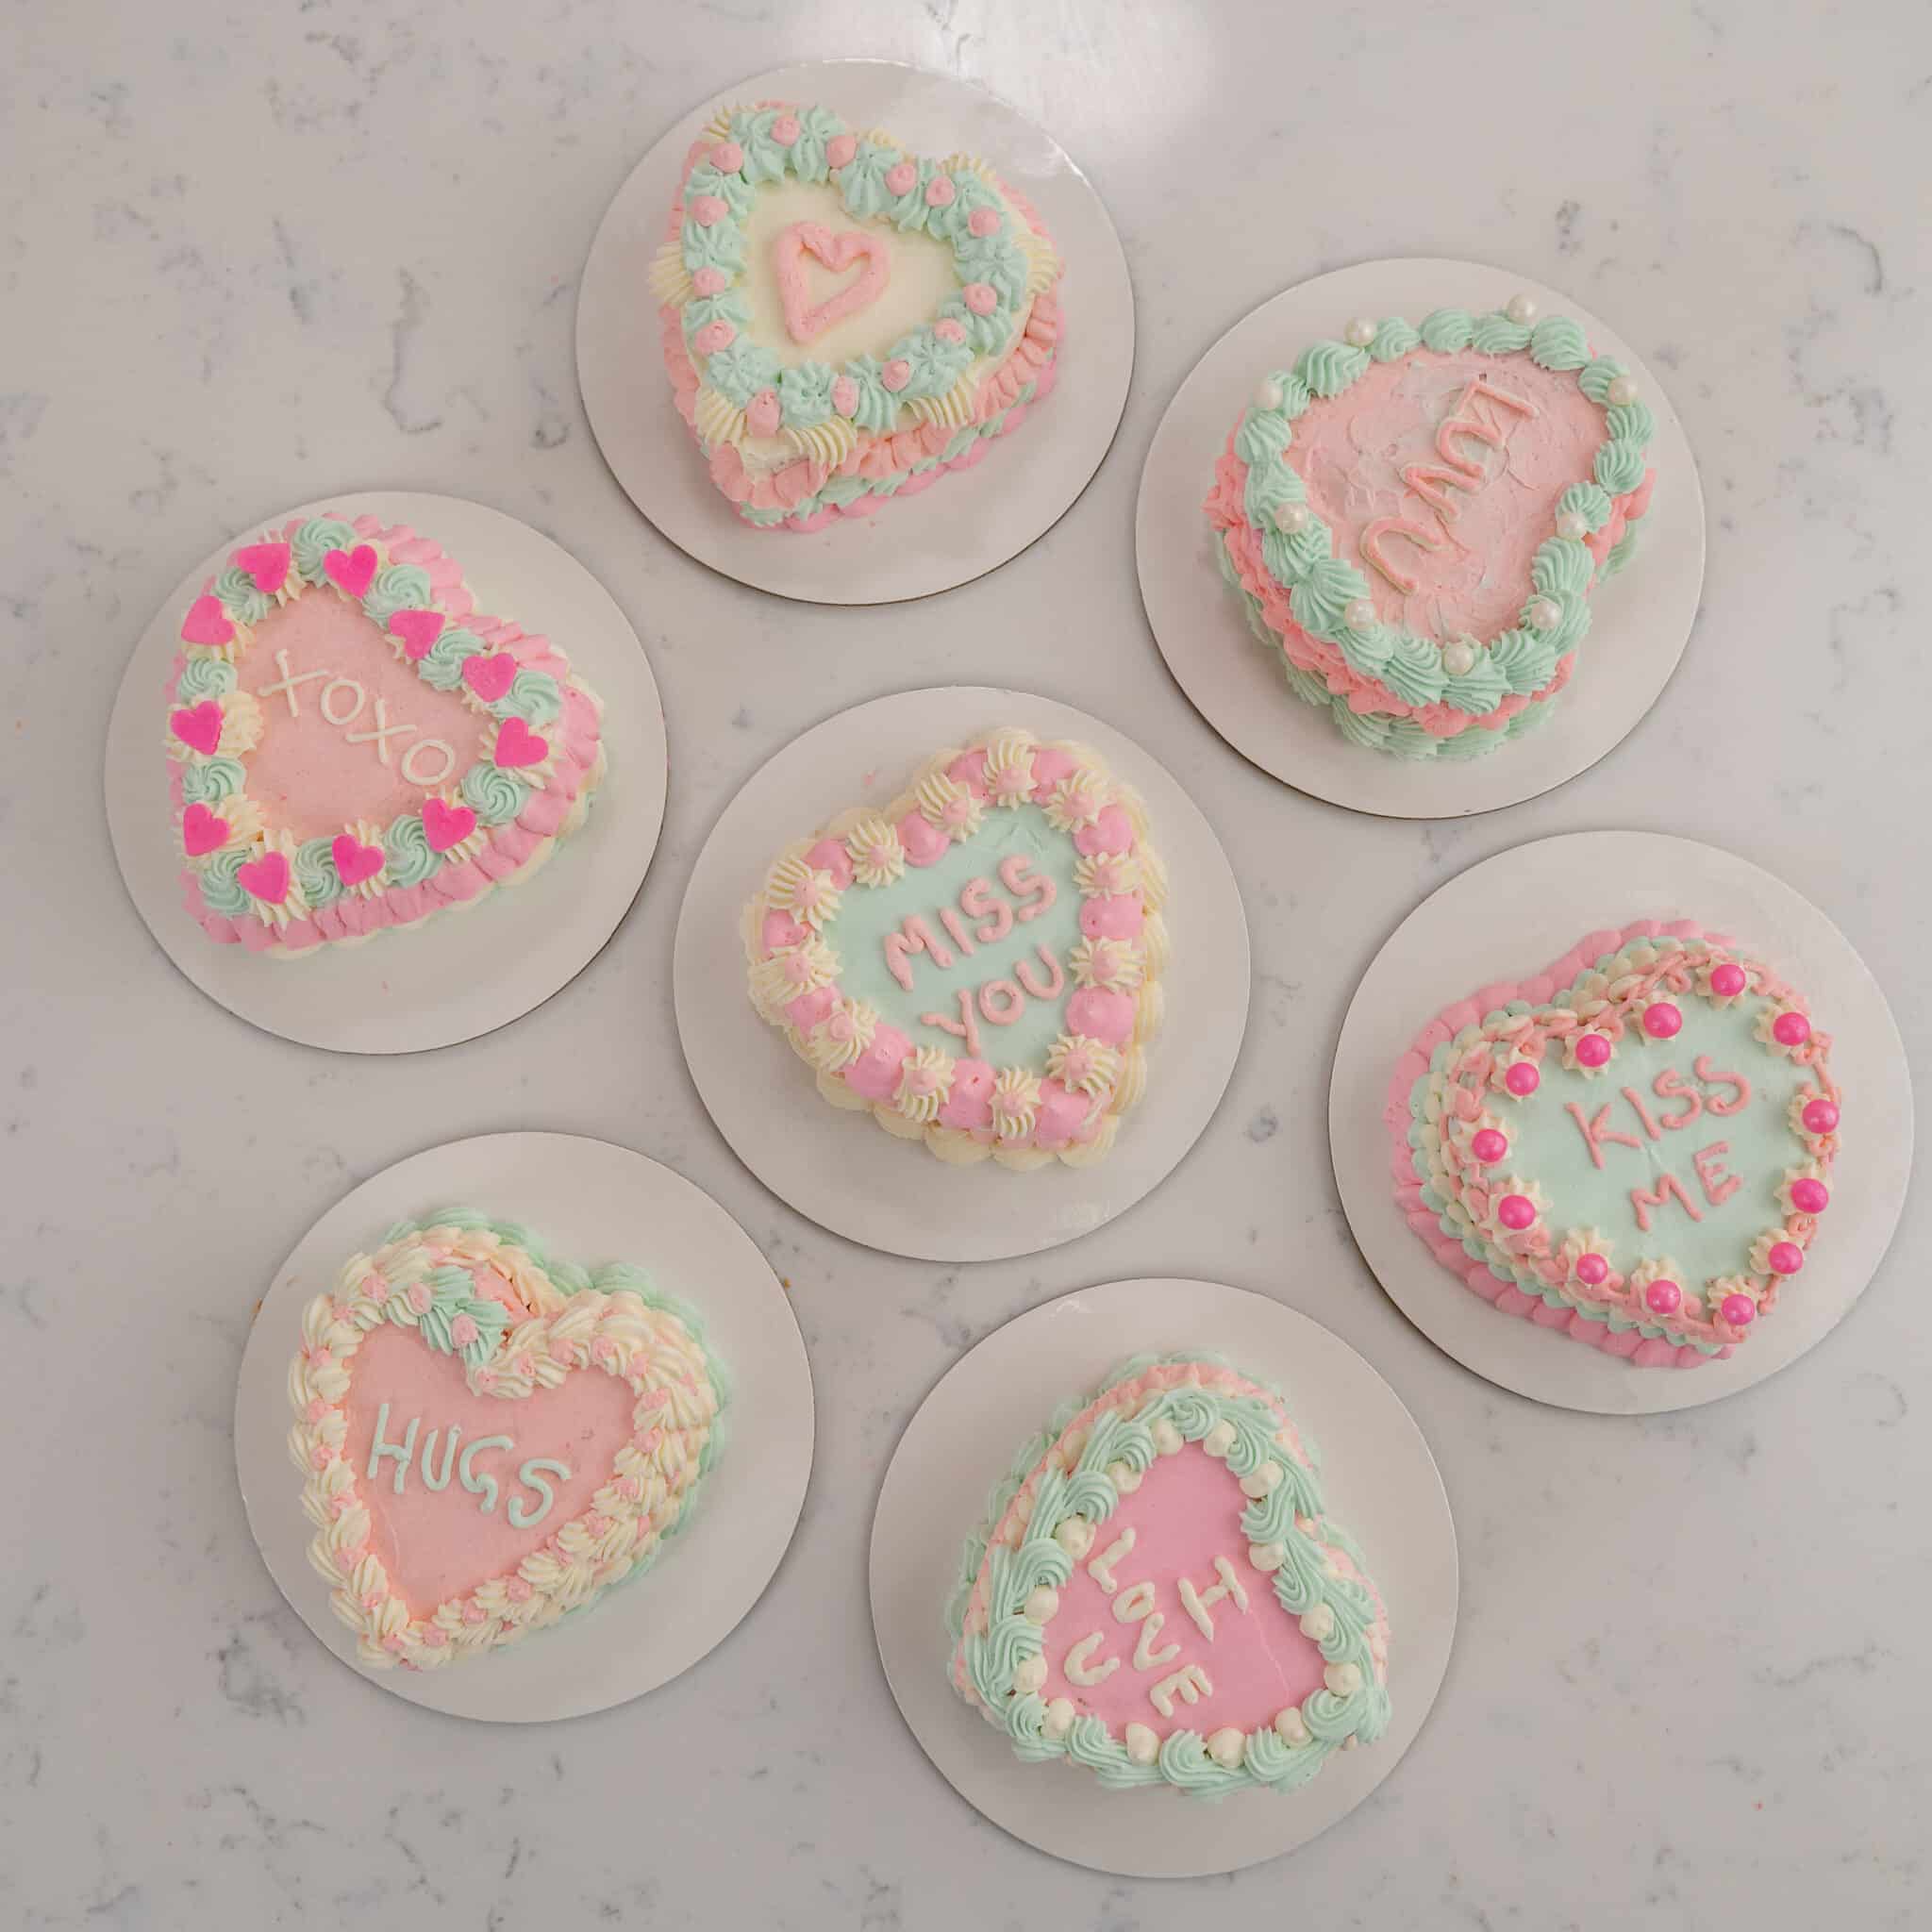 heart shaped lunchbox cakes on cake boards